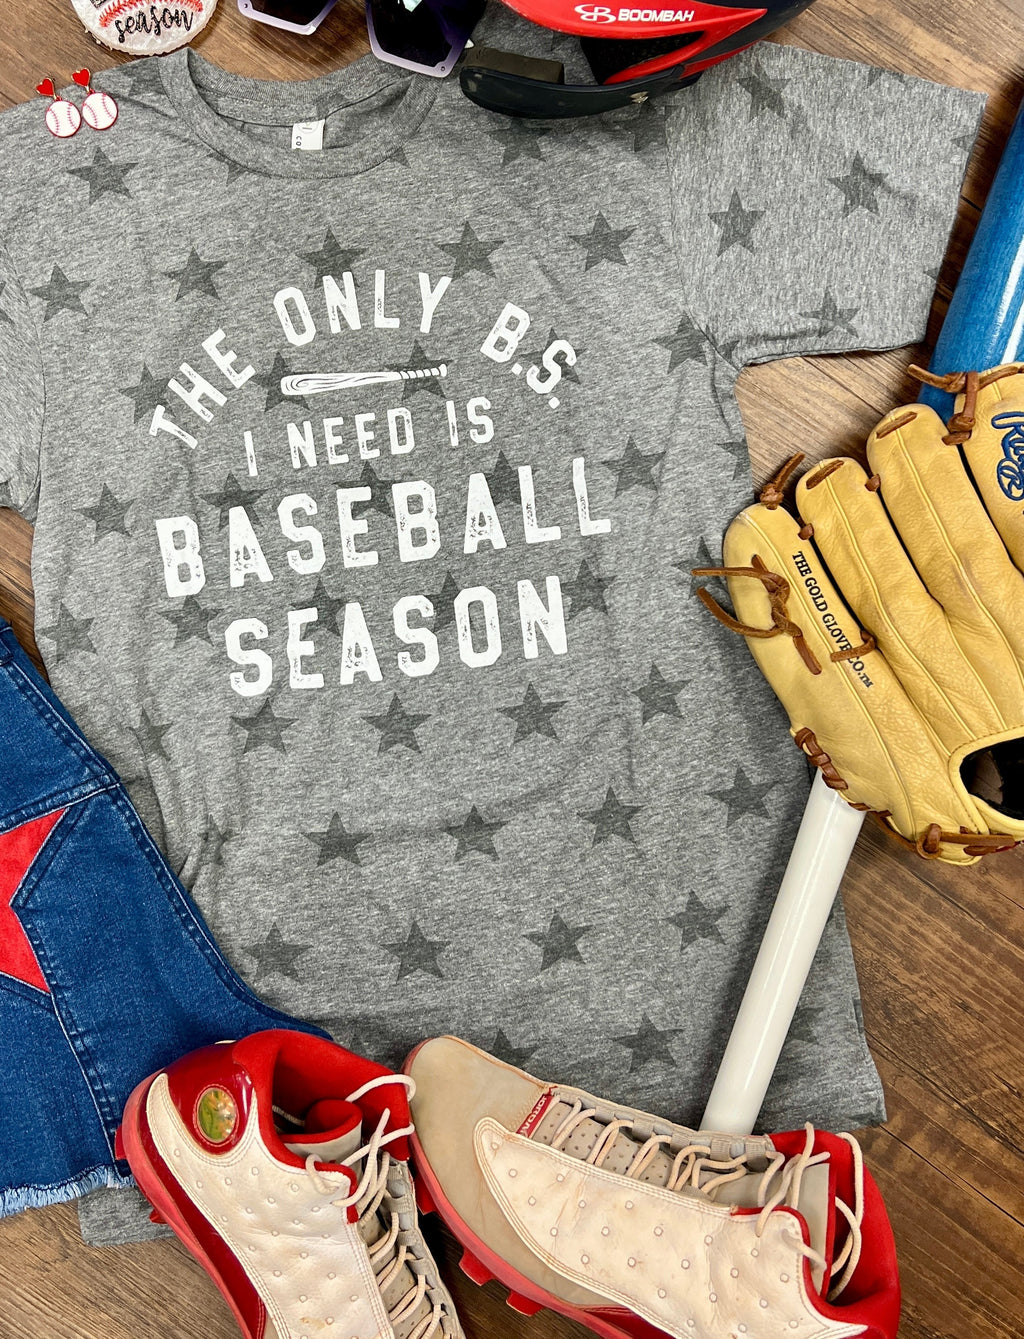 Baseball graphic tee. Baseball tee. Baseball fan shirt. Baseball shirt. Baseball mom shirt. Graphic tee with stars all over. Play on words graphic tees. "The Only B.S. I need is baseball season." Soft graphic tee. Trending style. Trending graphic tees. Popular baseball shirts. Comfortable graphic tees. Boutique. 